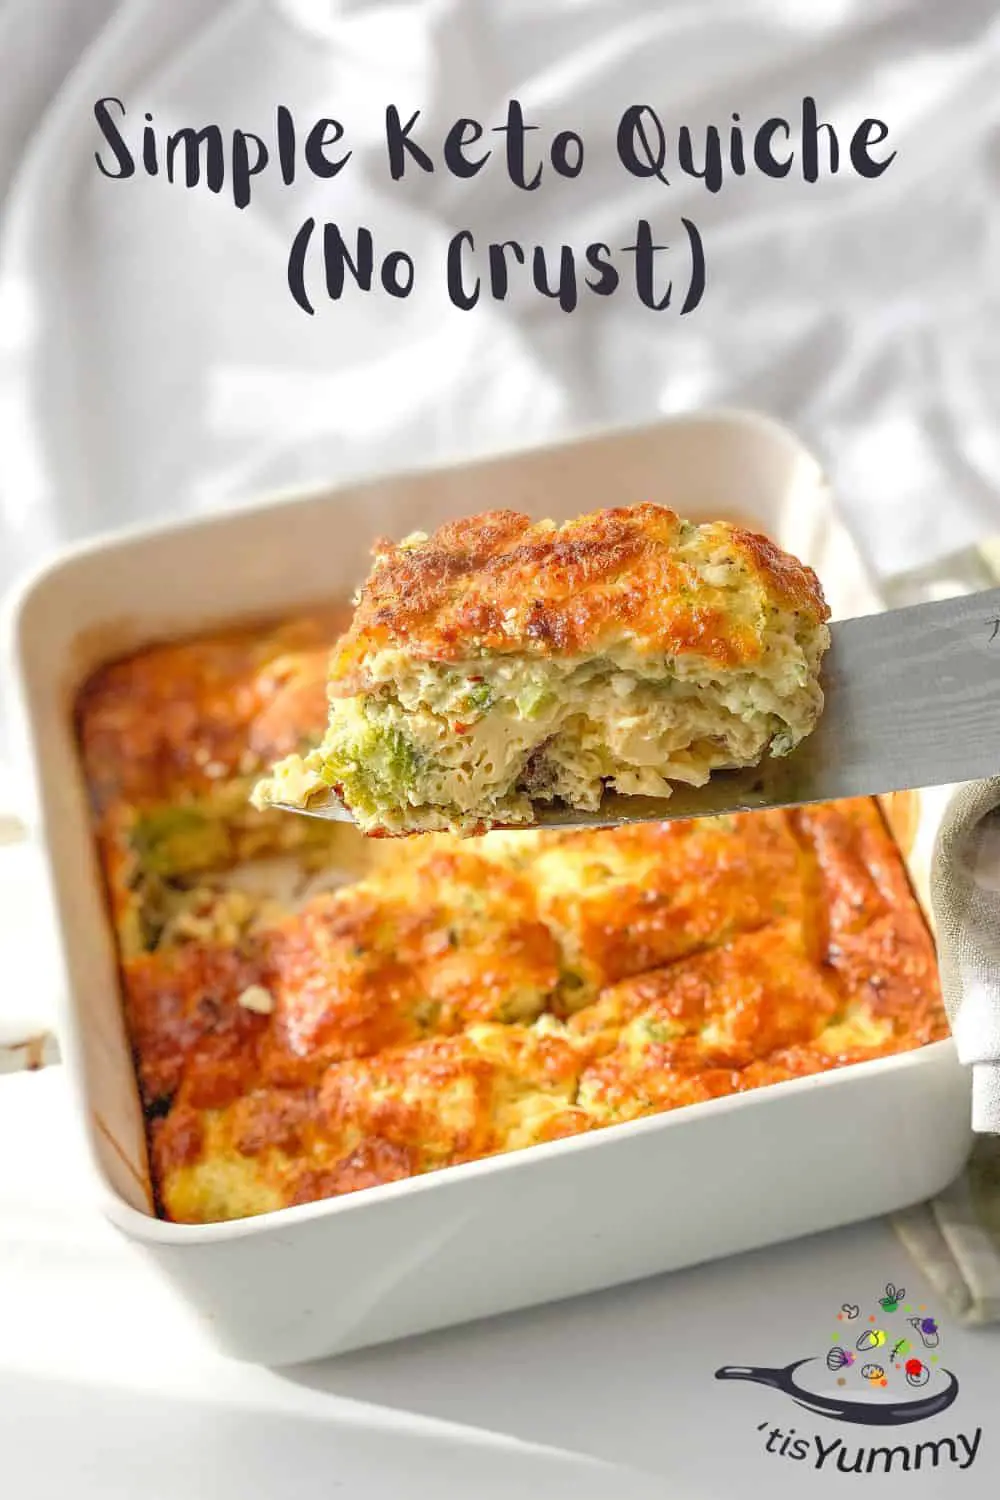 keto quiche with no crust being served on a knife 